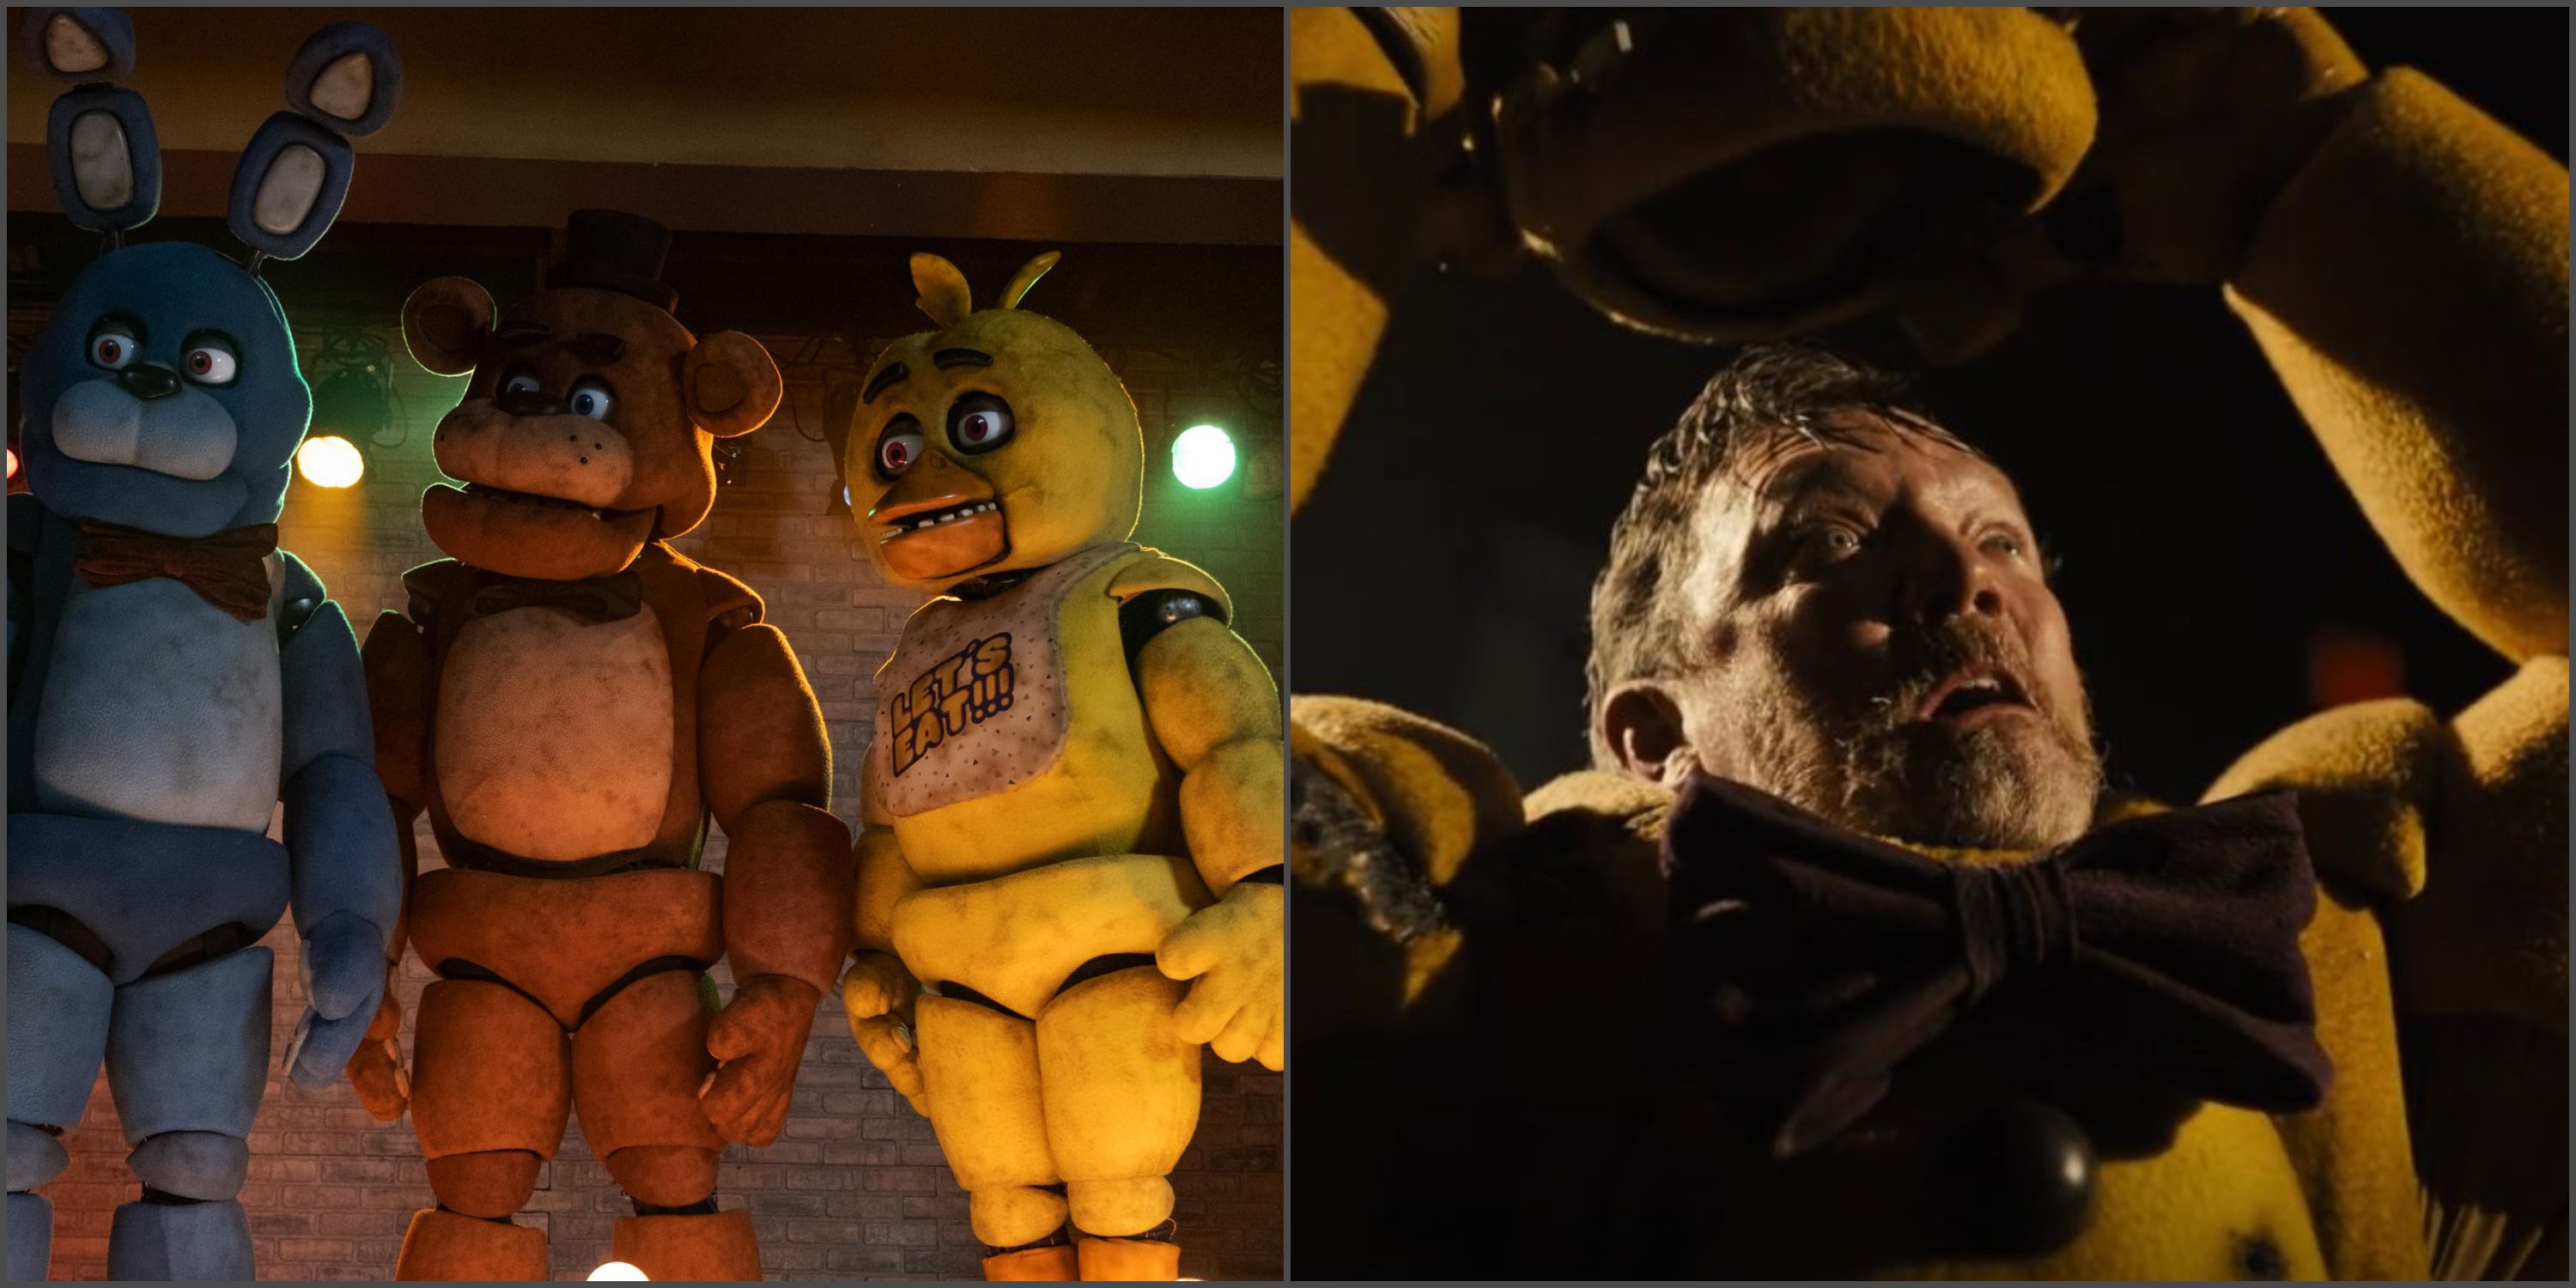 Five Nights at Freddy's Movie: Bonnie, Freddy, Chica, and William Afton as Springtrap